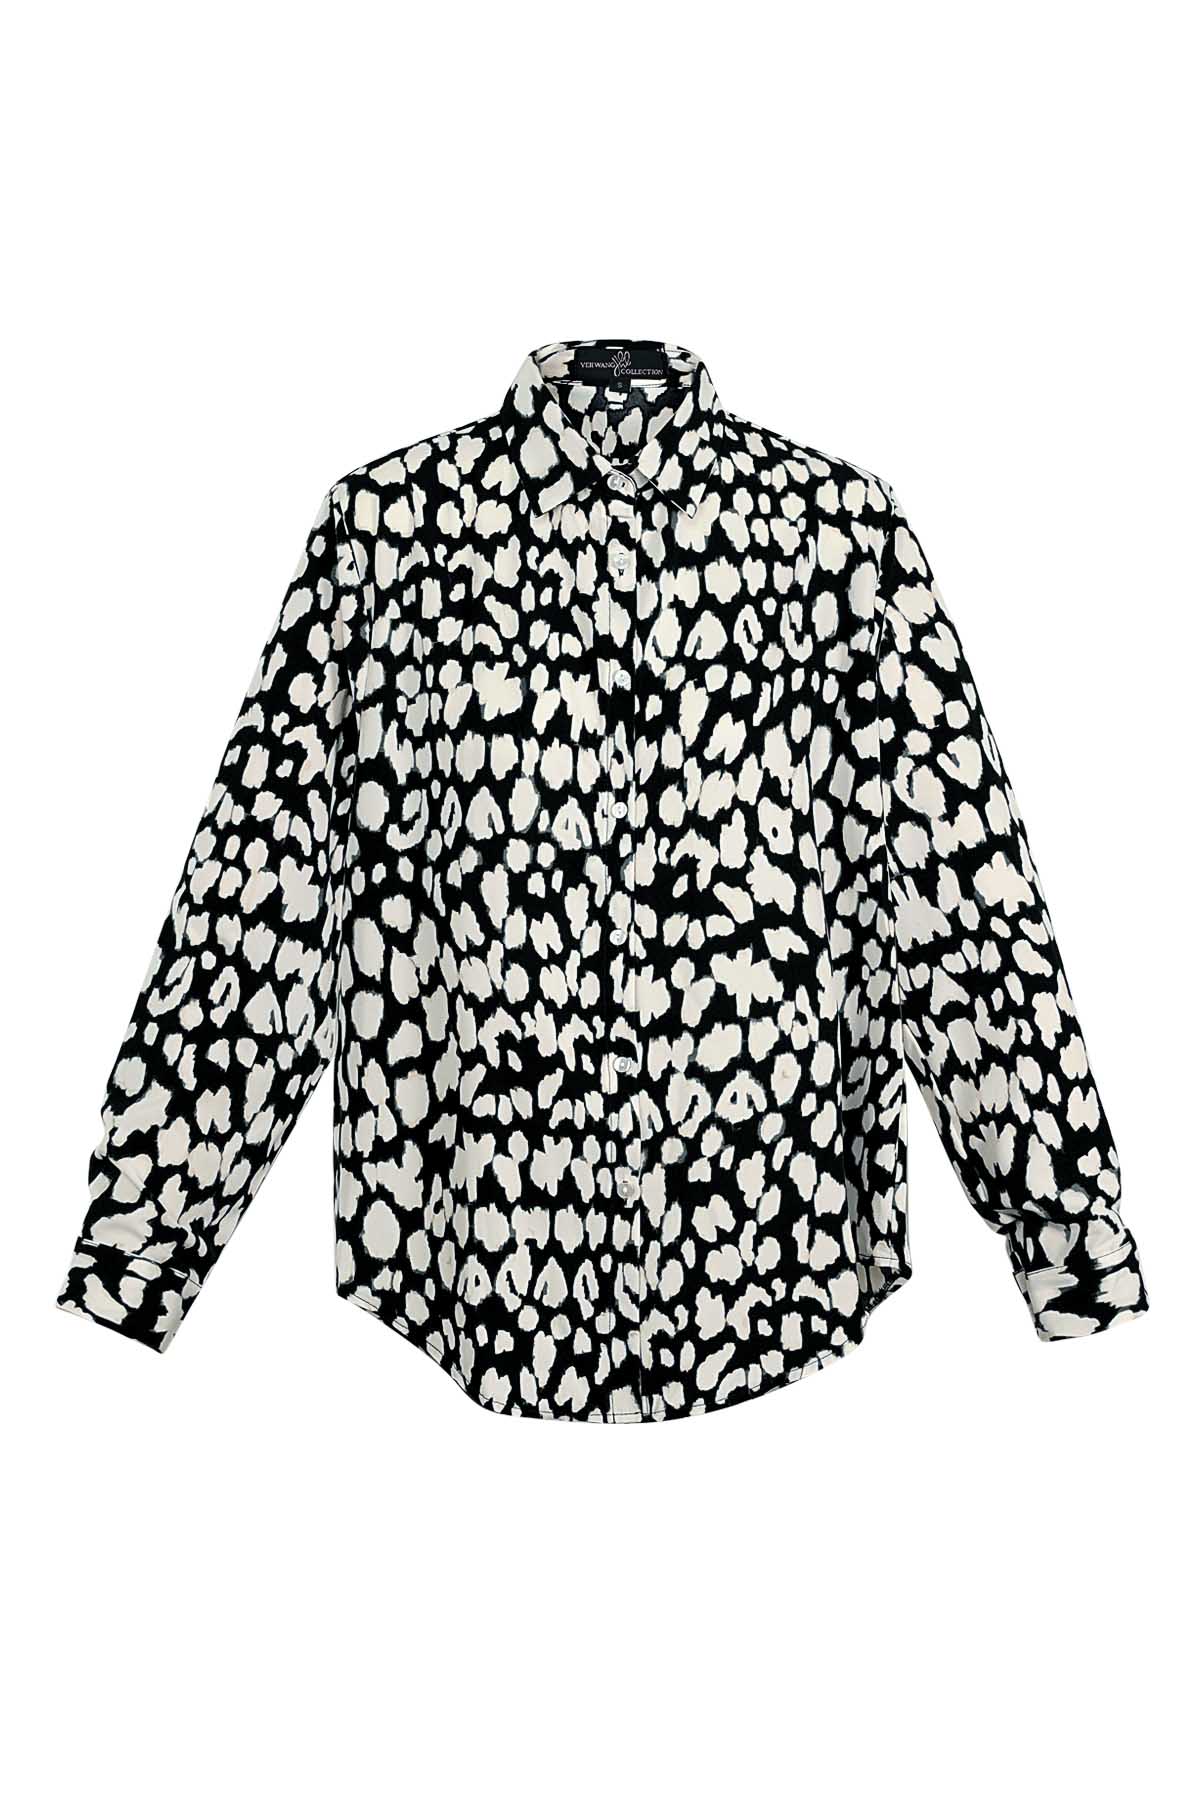 Leopard print blouse black and white 